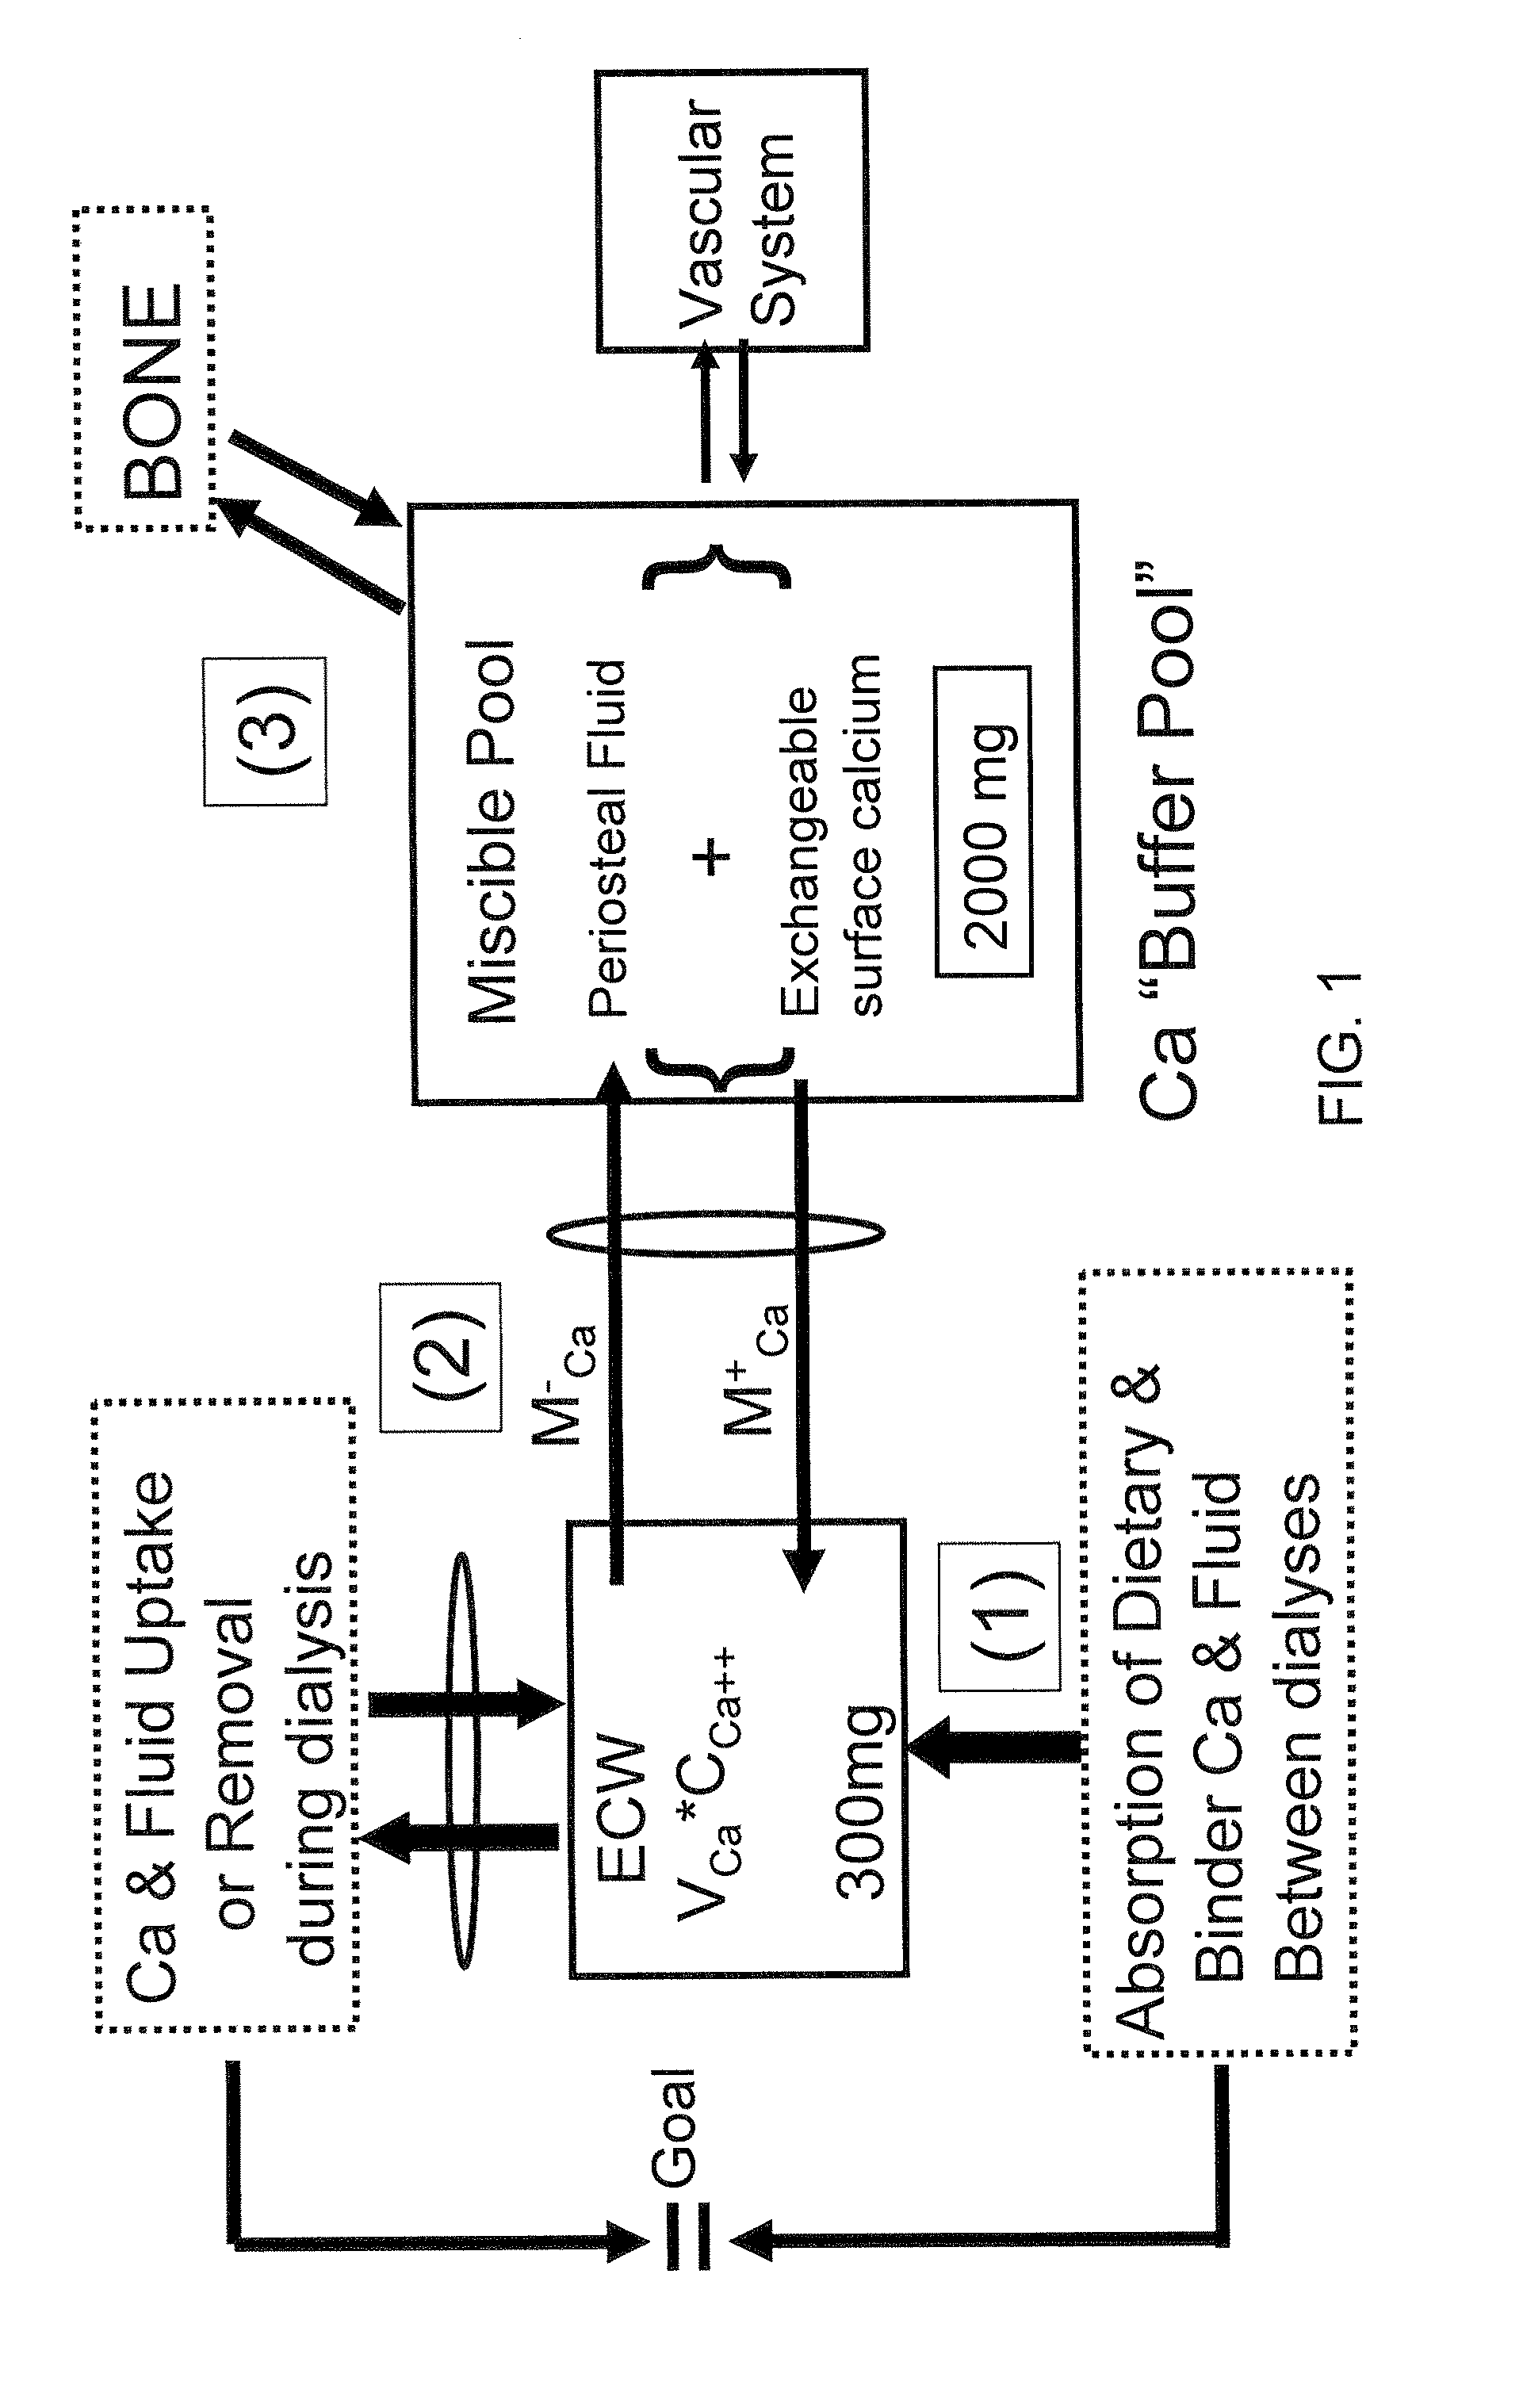 Method of Determining A Phosphorus Binder Dosage for a Dialysis Patient